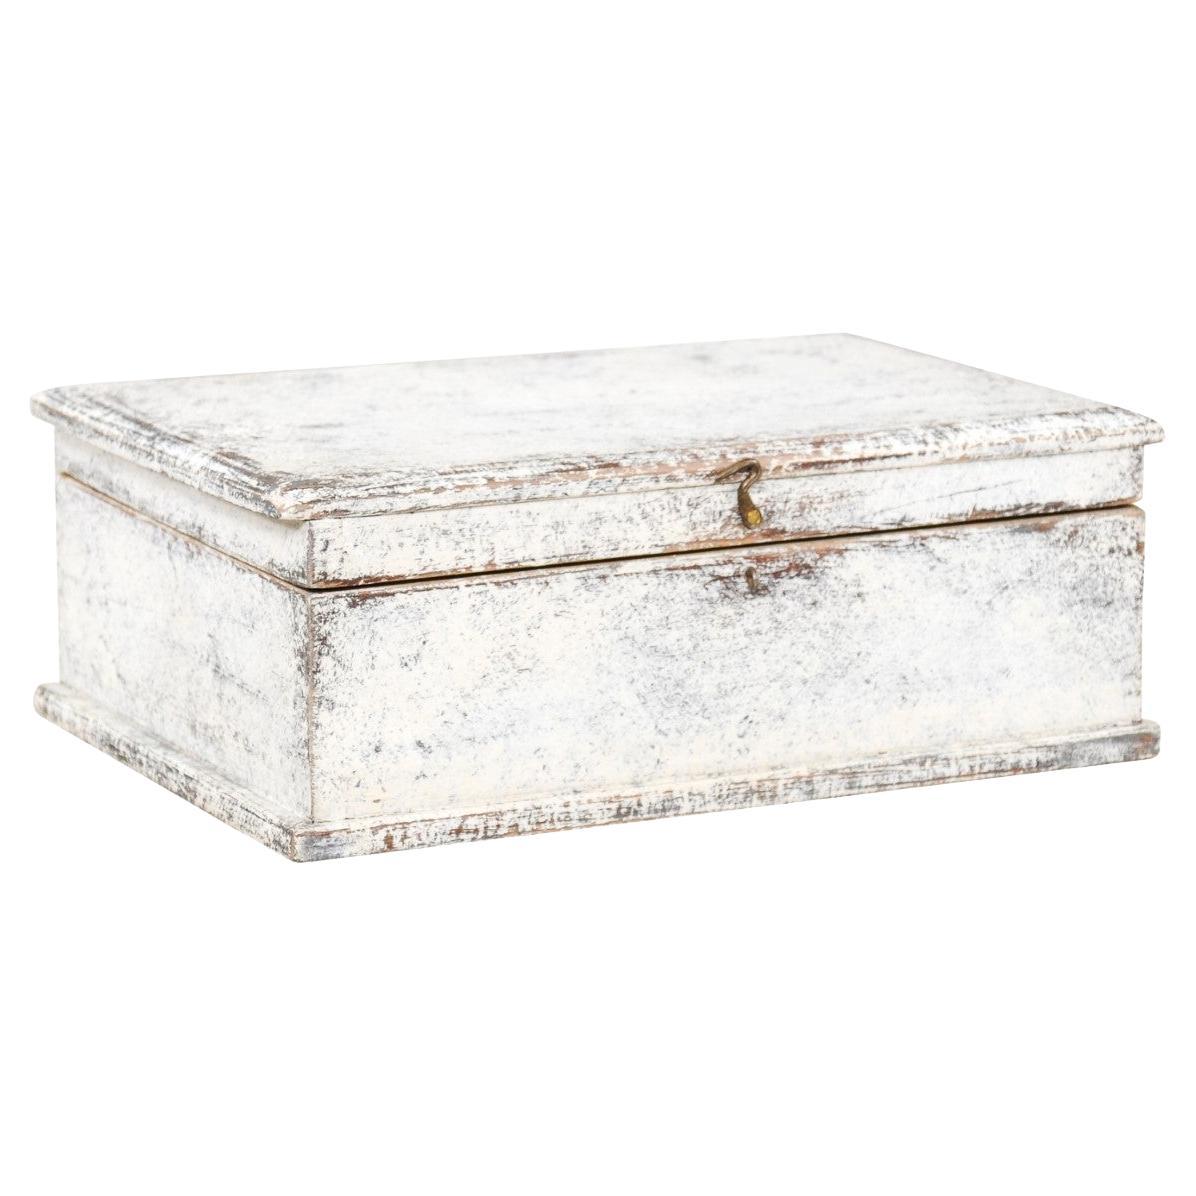 Turn of the Century Swedish 1900s Painted Decorative Box with Distressed Patina